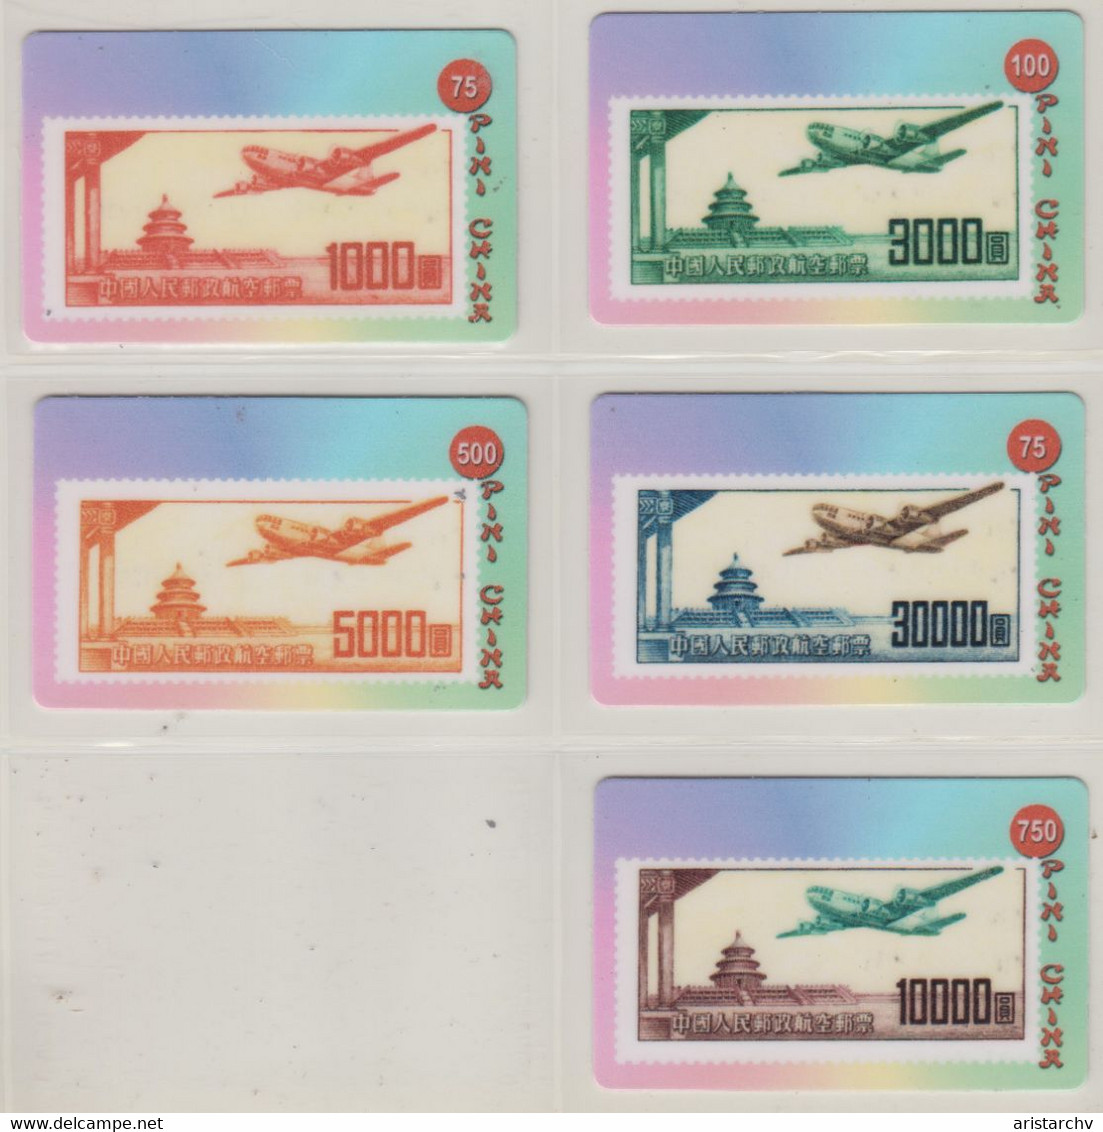 CHINA AVIATION PLANE STAMPS ON PHONE CARDS SET OF 5 CARDS - Timbres & Monnaies